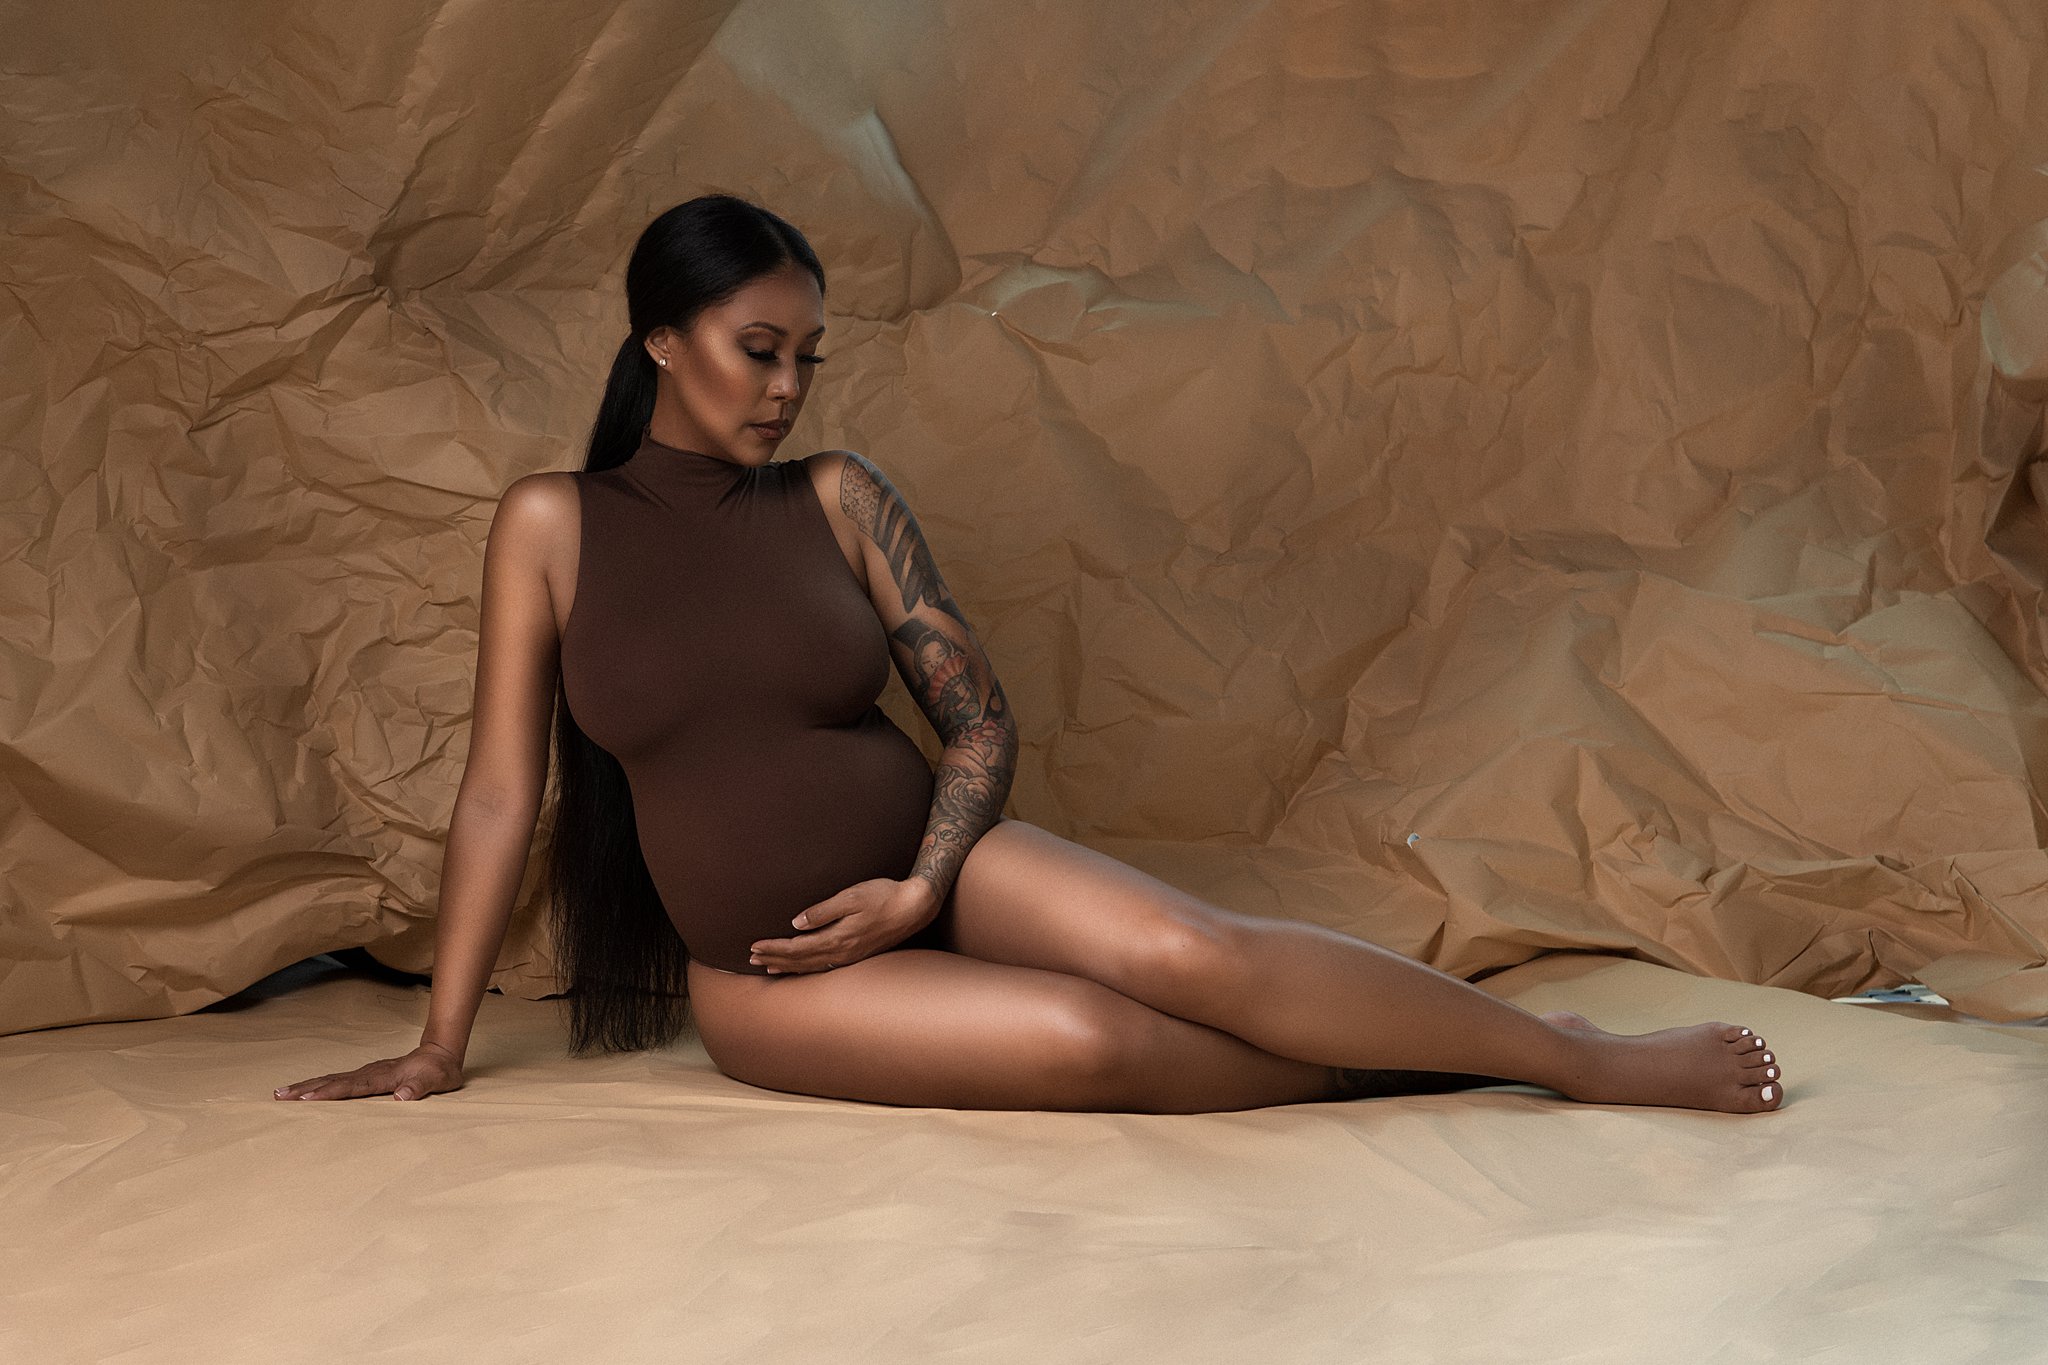 A mother to be in a brown maternity onesie lays on the floor of a studio